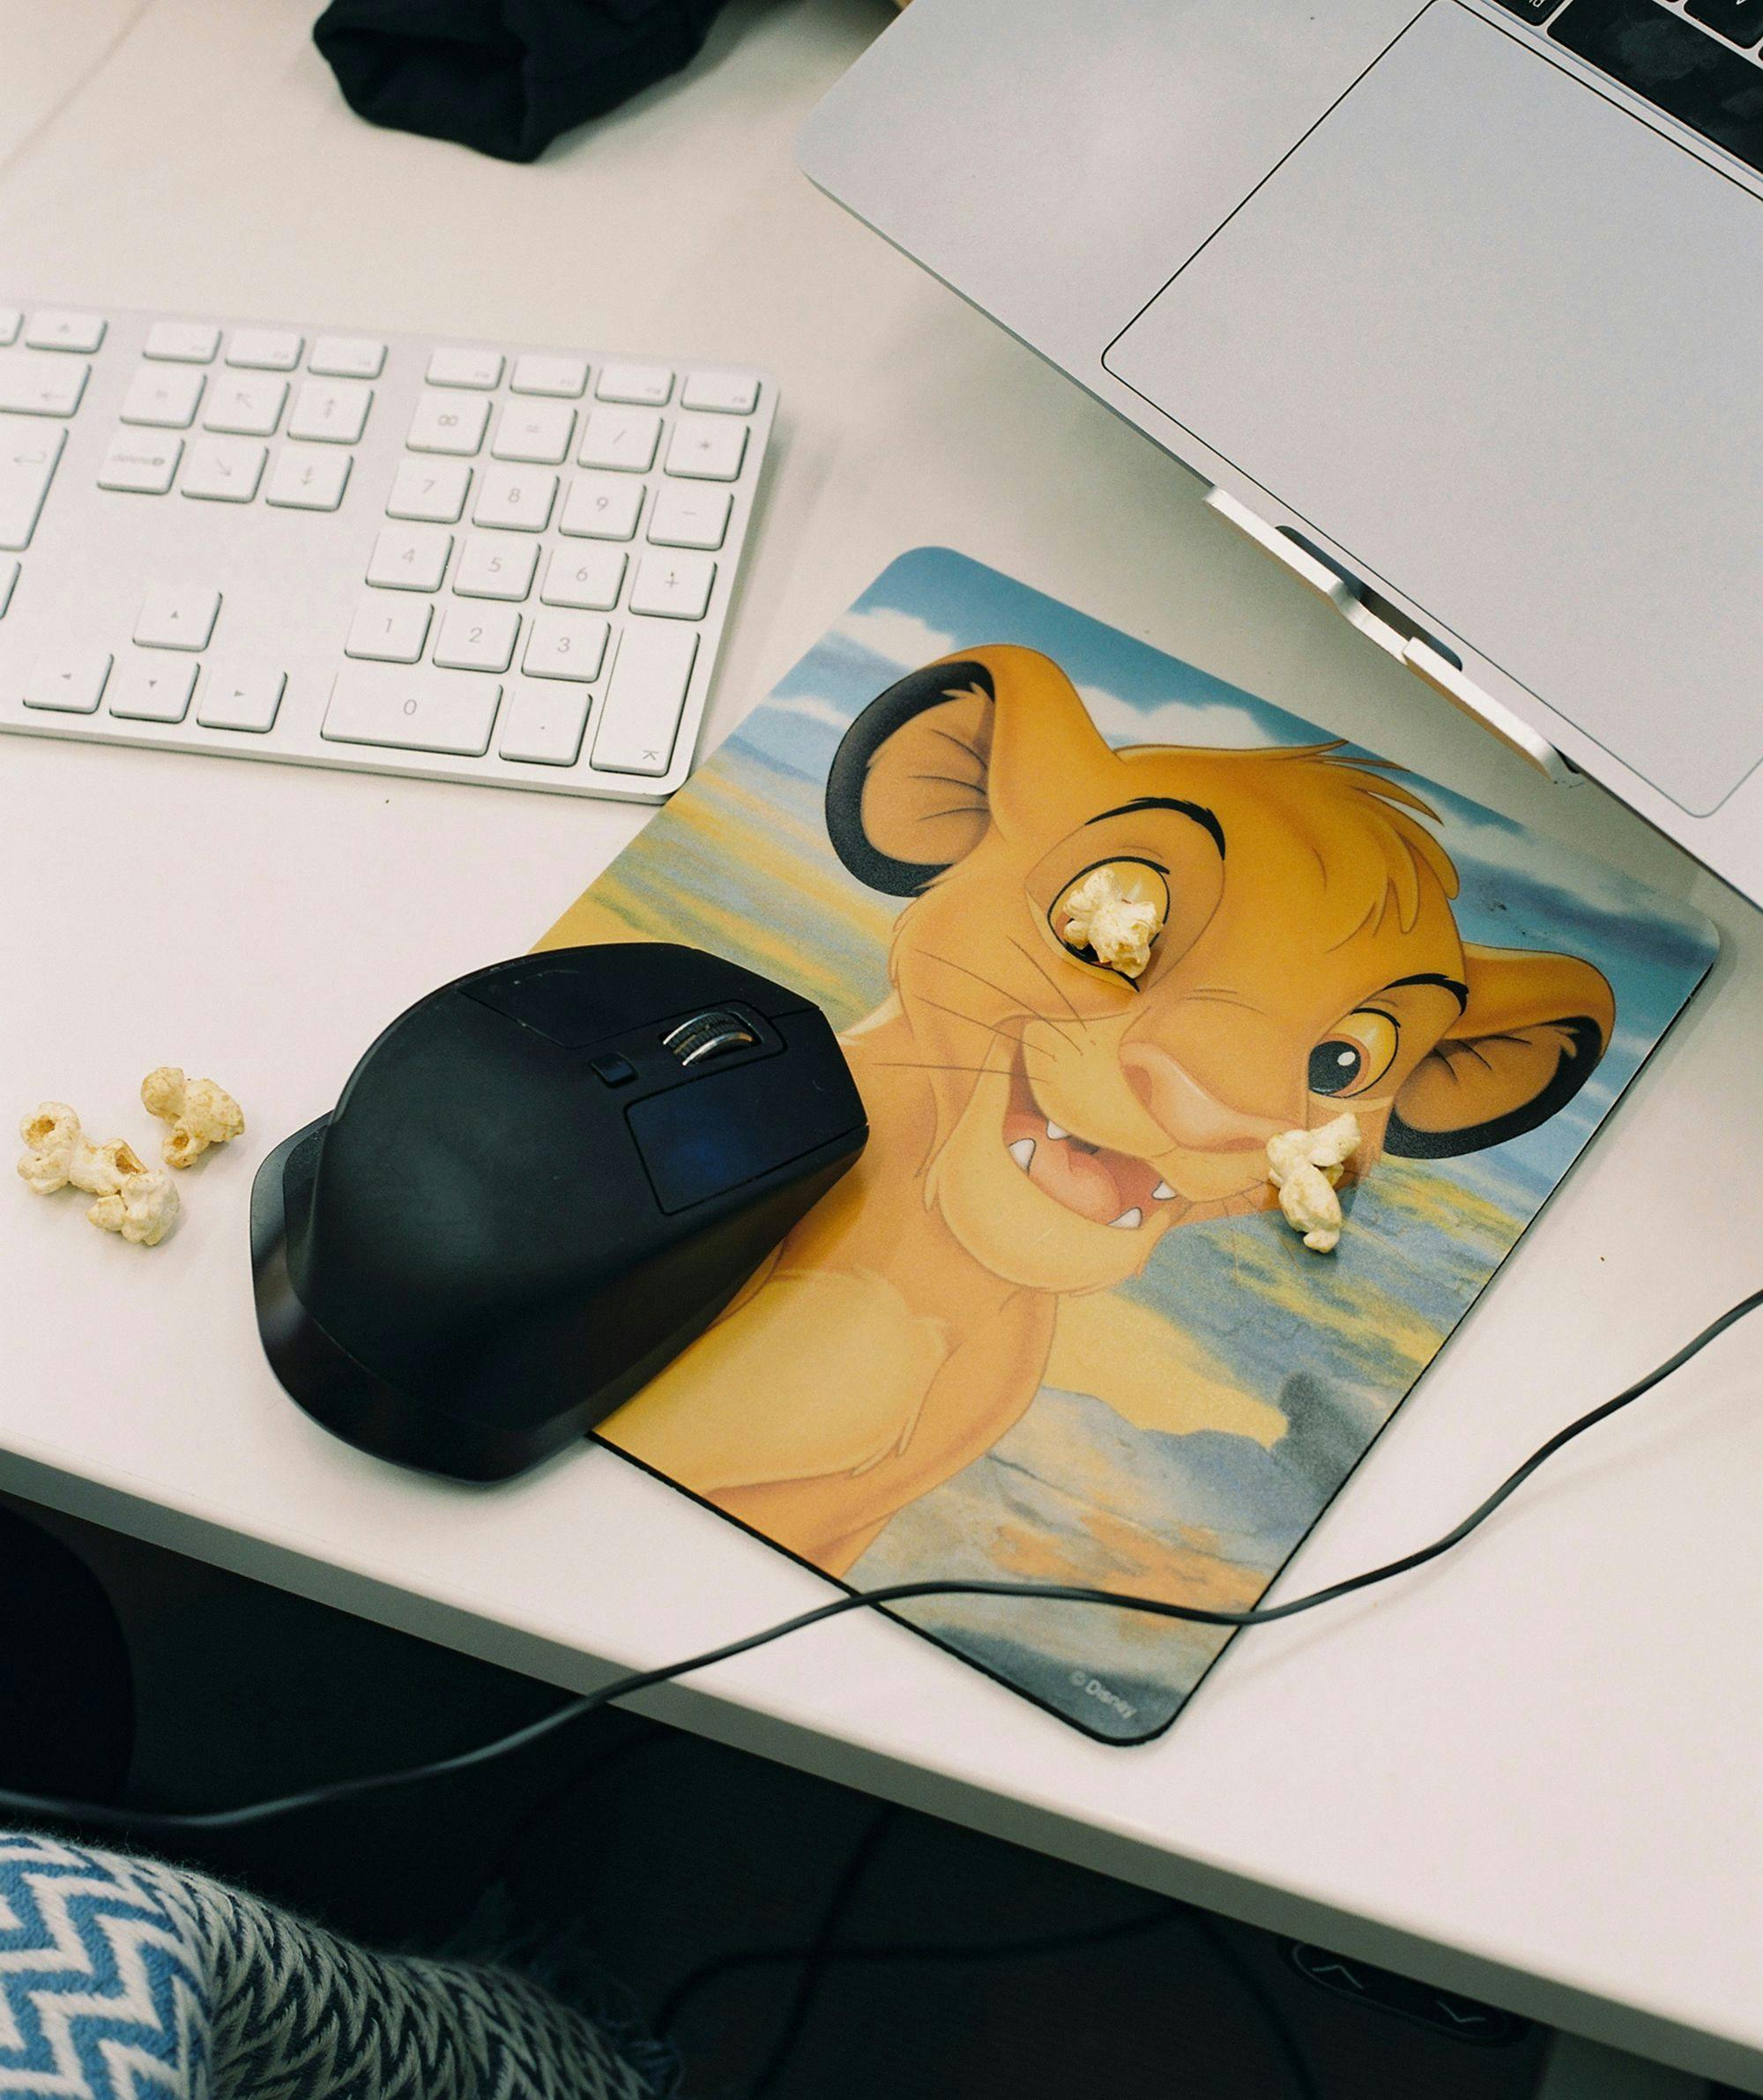 Computer, keyboard, mouse and mousepad with pieces of popcorn